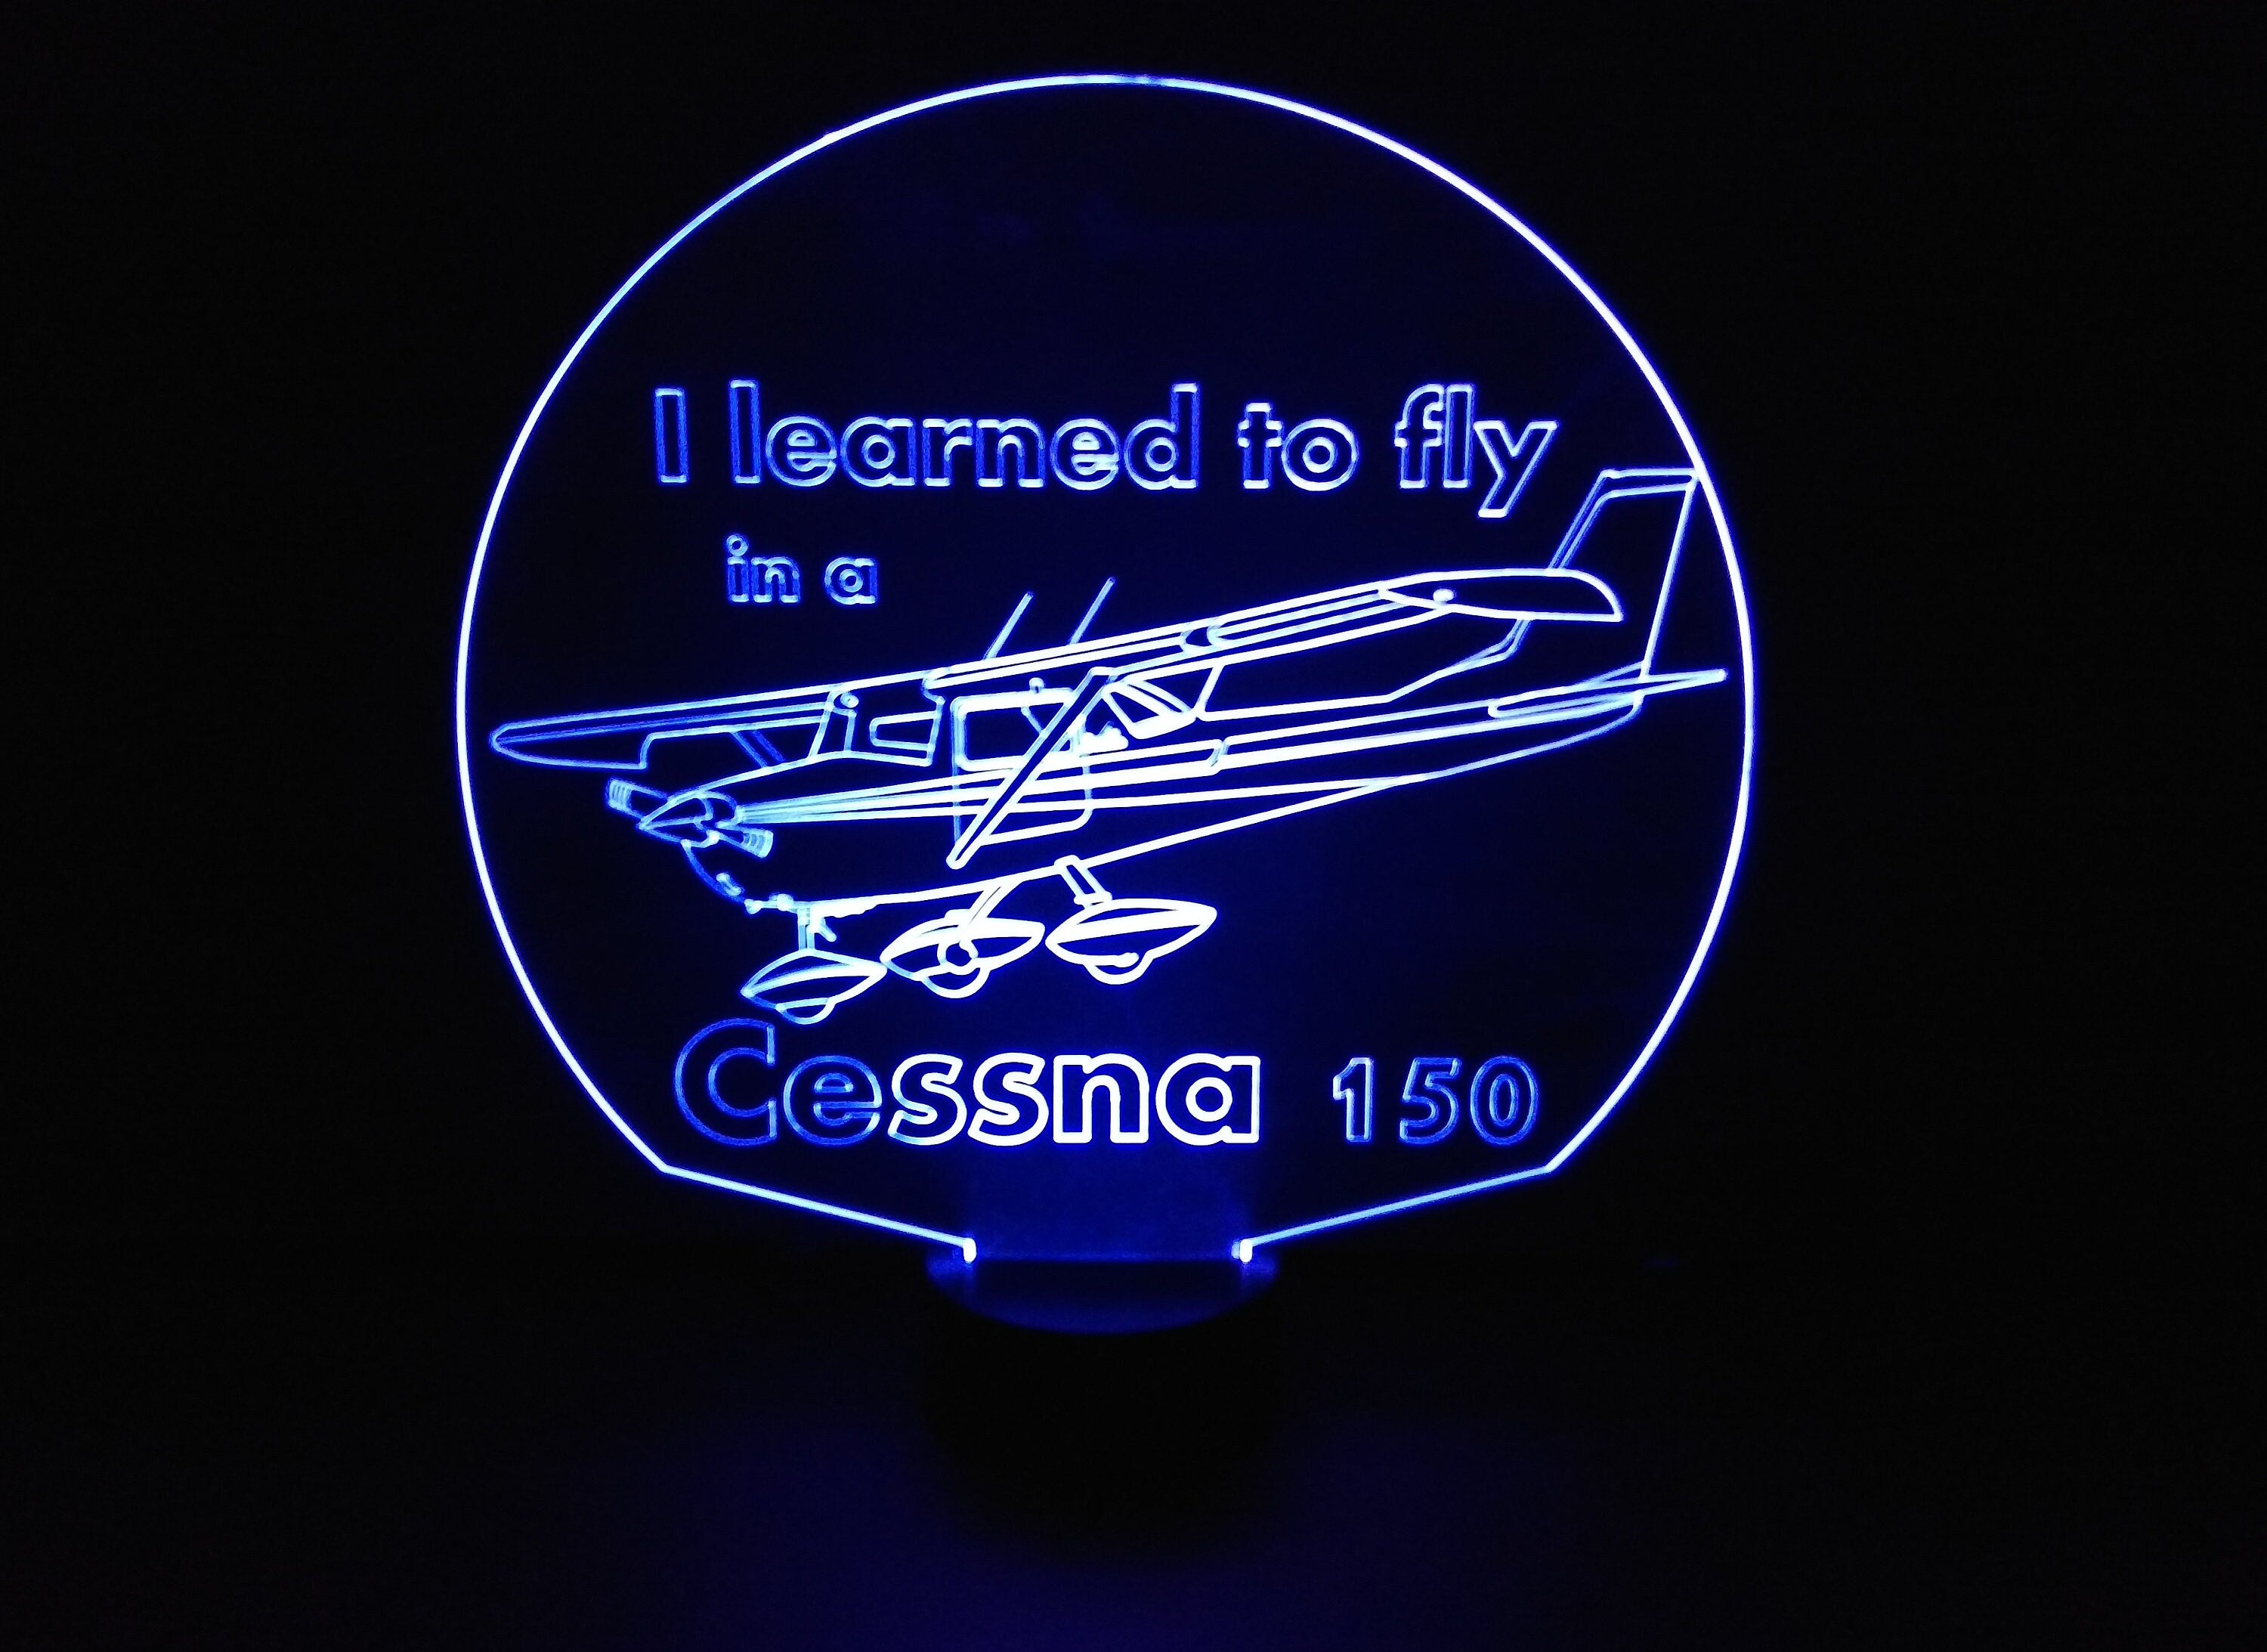 Awesome "I learned to fly in a Cessna 150" LED lamp appears as 3D Object (1099) - FREE SHIPPING!